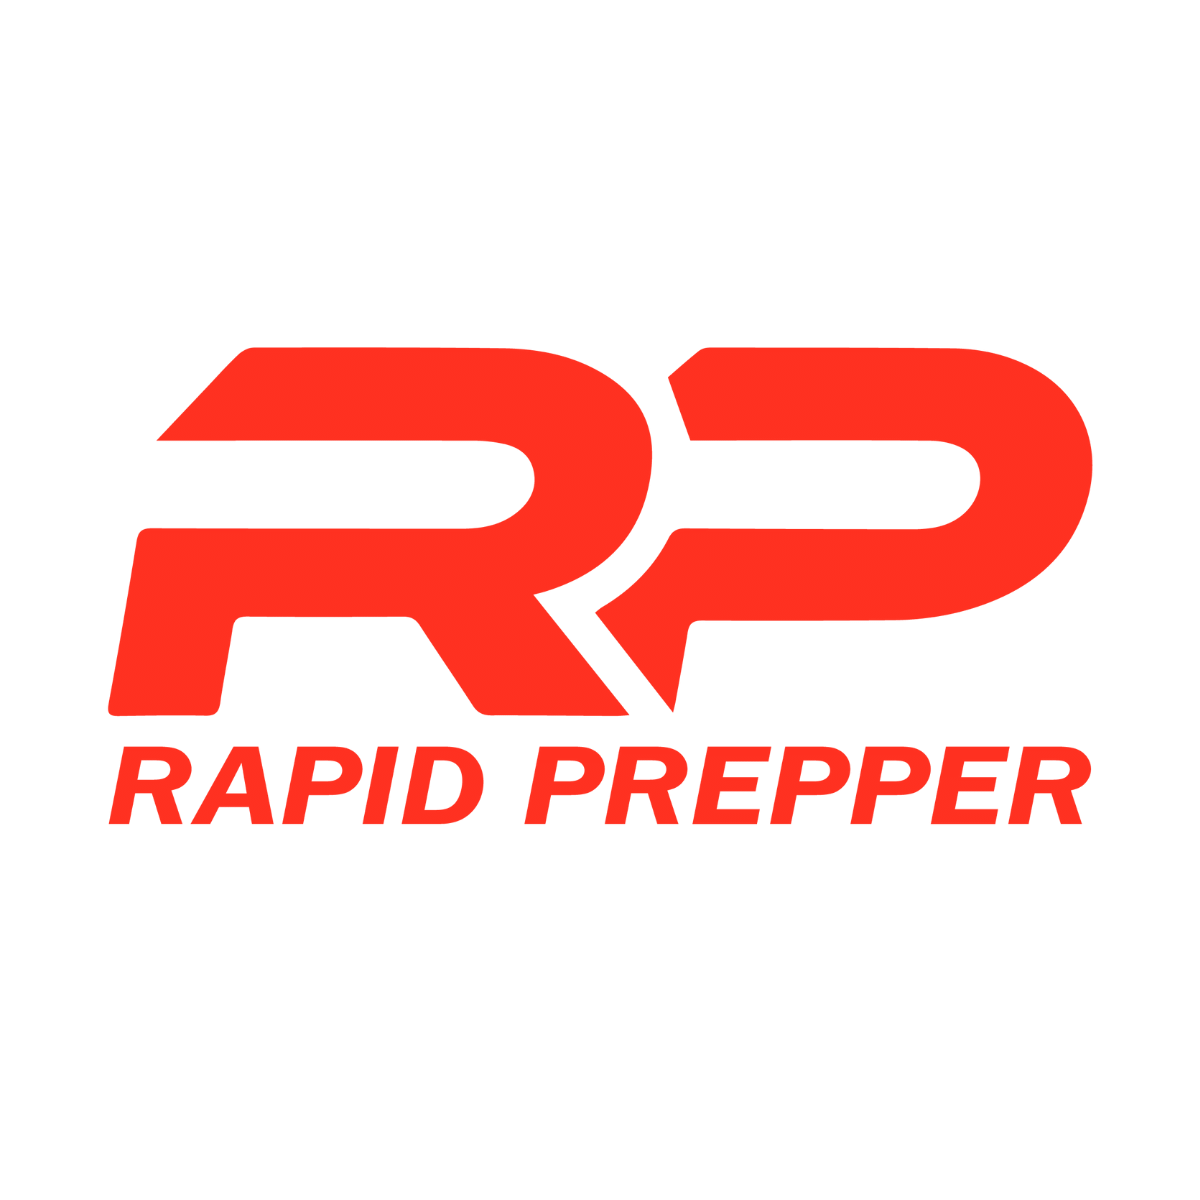 RAPID PREPPER EMERGENCY AND SURVIVAL KITS